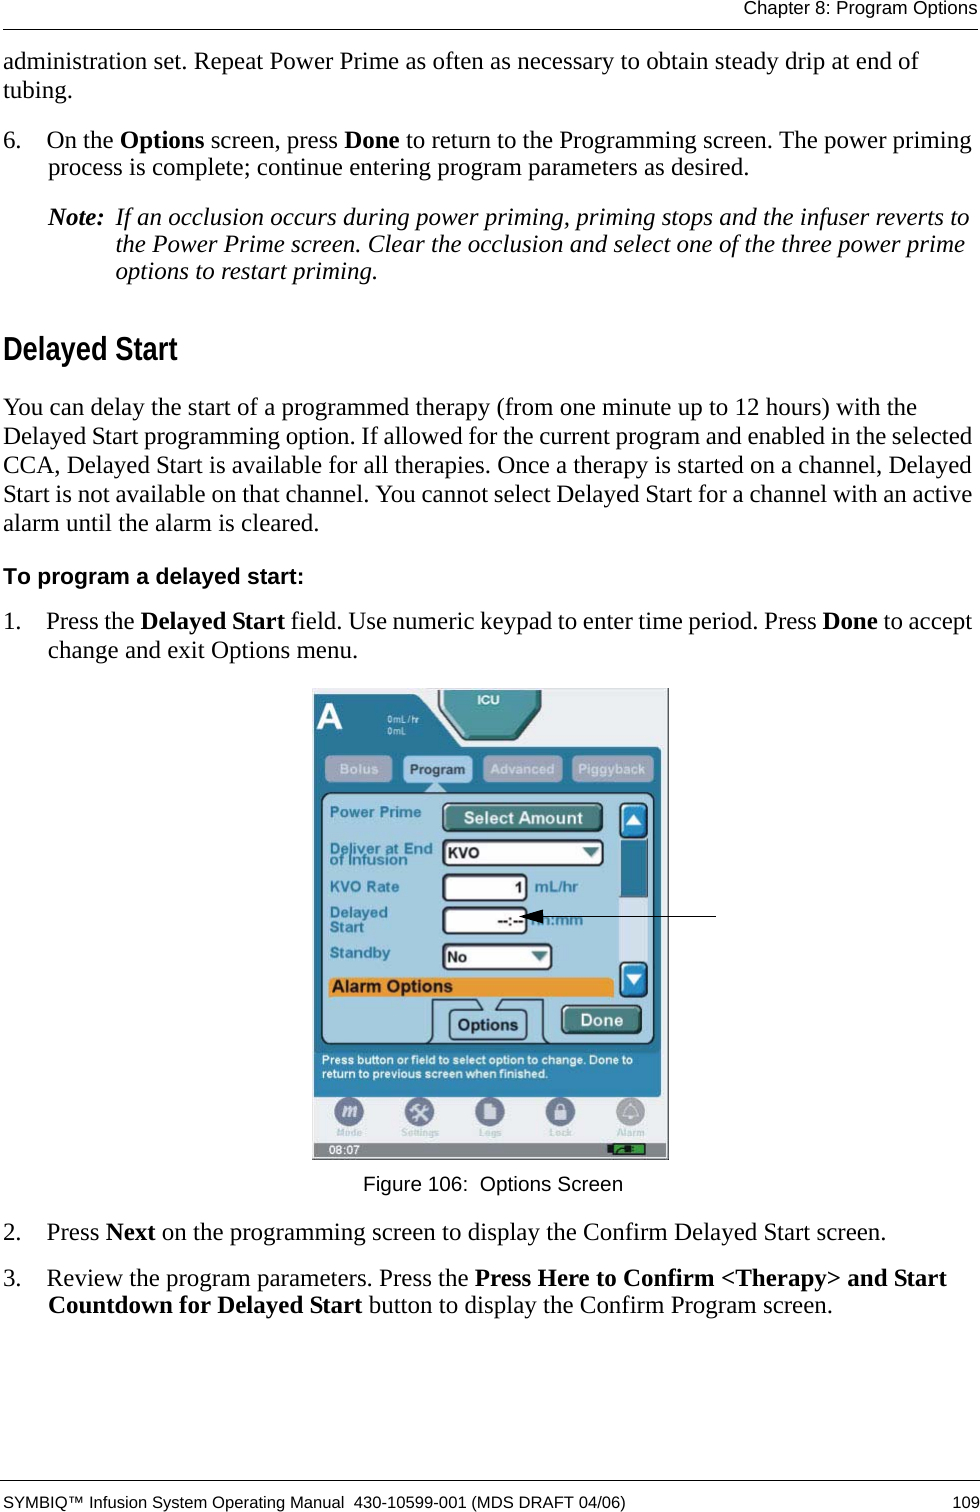 Chapter 8: Program Options SYMBIQ™ Infusion System Operating Manual  430-10599-001 (MDS DRAFT 04/06) 109administration set. Repeat Power Prime as often as necessary to obtain steady drip at end of tubing.6.  On the Options screen, press Done to return to the Programming screen. The power priming process is complete; continue entering program parameters as desired.Note: If an occlusion occurs during power priming, priming stops and the infuser reverts to the Power Prime screen. Clear the occlusion and select one of the three power prime options to restart priming.Delayed StartYou can delay the start of a programmed therapy (from one minute up to 12 hours) with the Delayed Start programming option. If allowed for the current program and enabled in the selected CCA, Delayed Start is available for all therapies. Once a therapy is started on a channel, Delayed Start is not available on that channel. You cannot select Delayed Start for a channel with an active alarm until the alarm is cleared.To program a delayed start:1.  Press the Delayed Start field. Use numeric keypad to enter time period. Press Done to accept change and exit Options menu. Figure 106:  Options Screen2.  Press Next on the programming screen to display the Confirm Delayed Start screen.3.  Review the program parameters. Press the Press Here to Confirm &lt;Therapy&gt; and Start Countdown for Delayed Start button to display the Confirm Program screen.